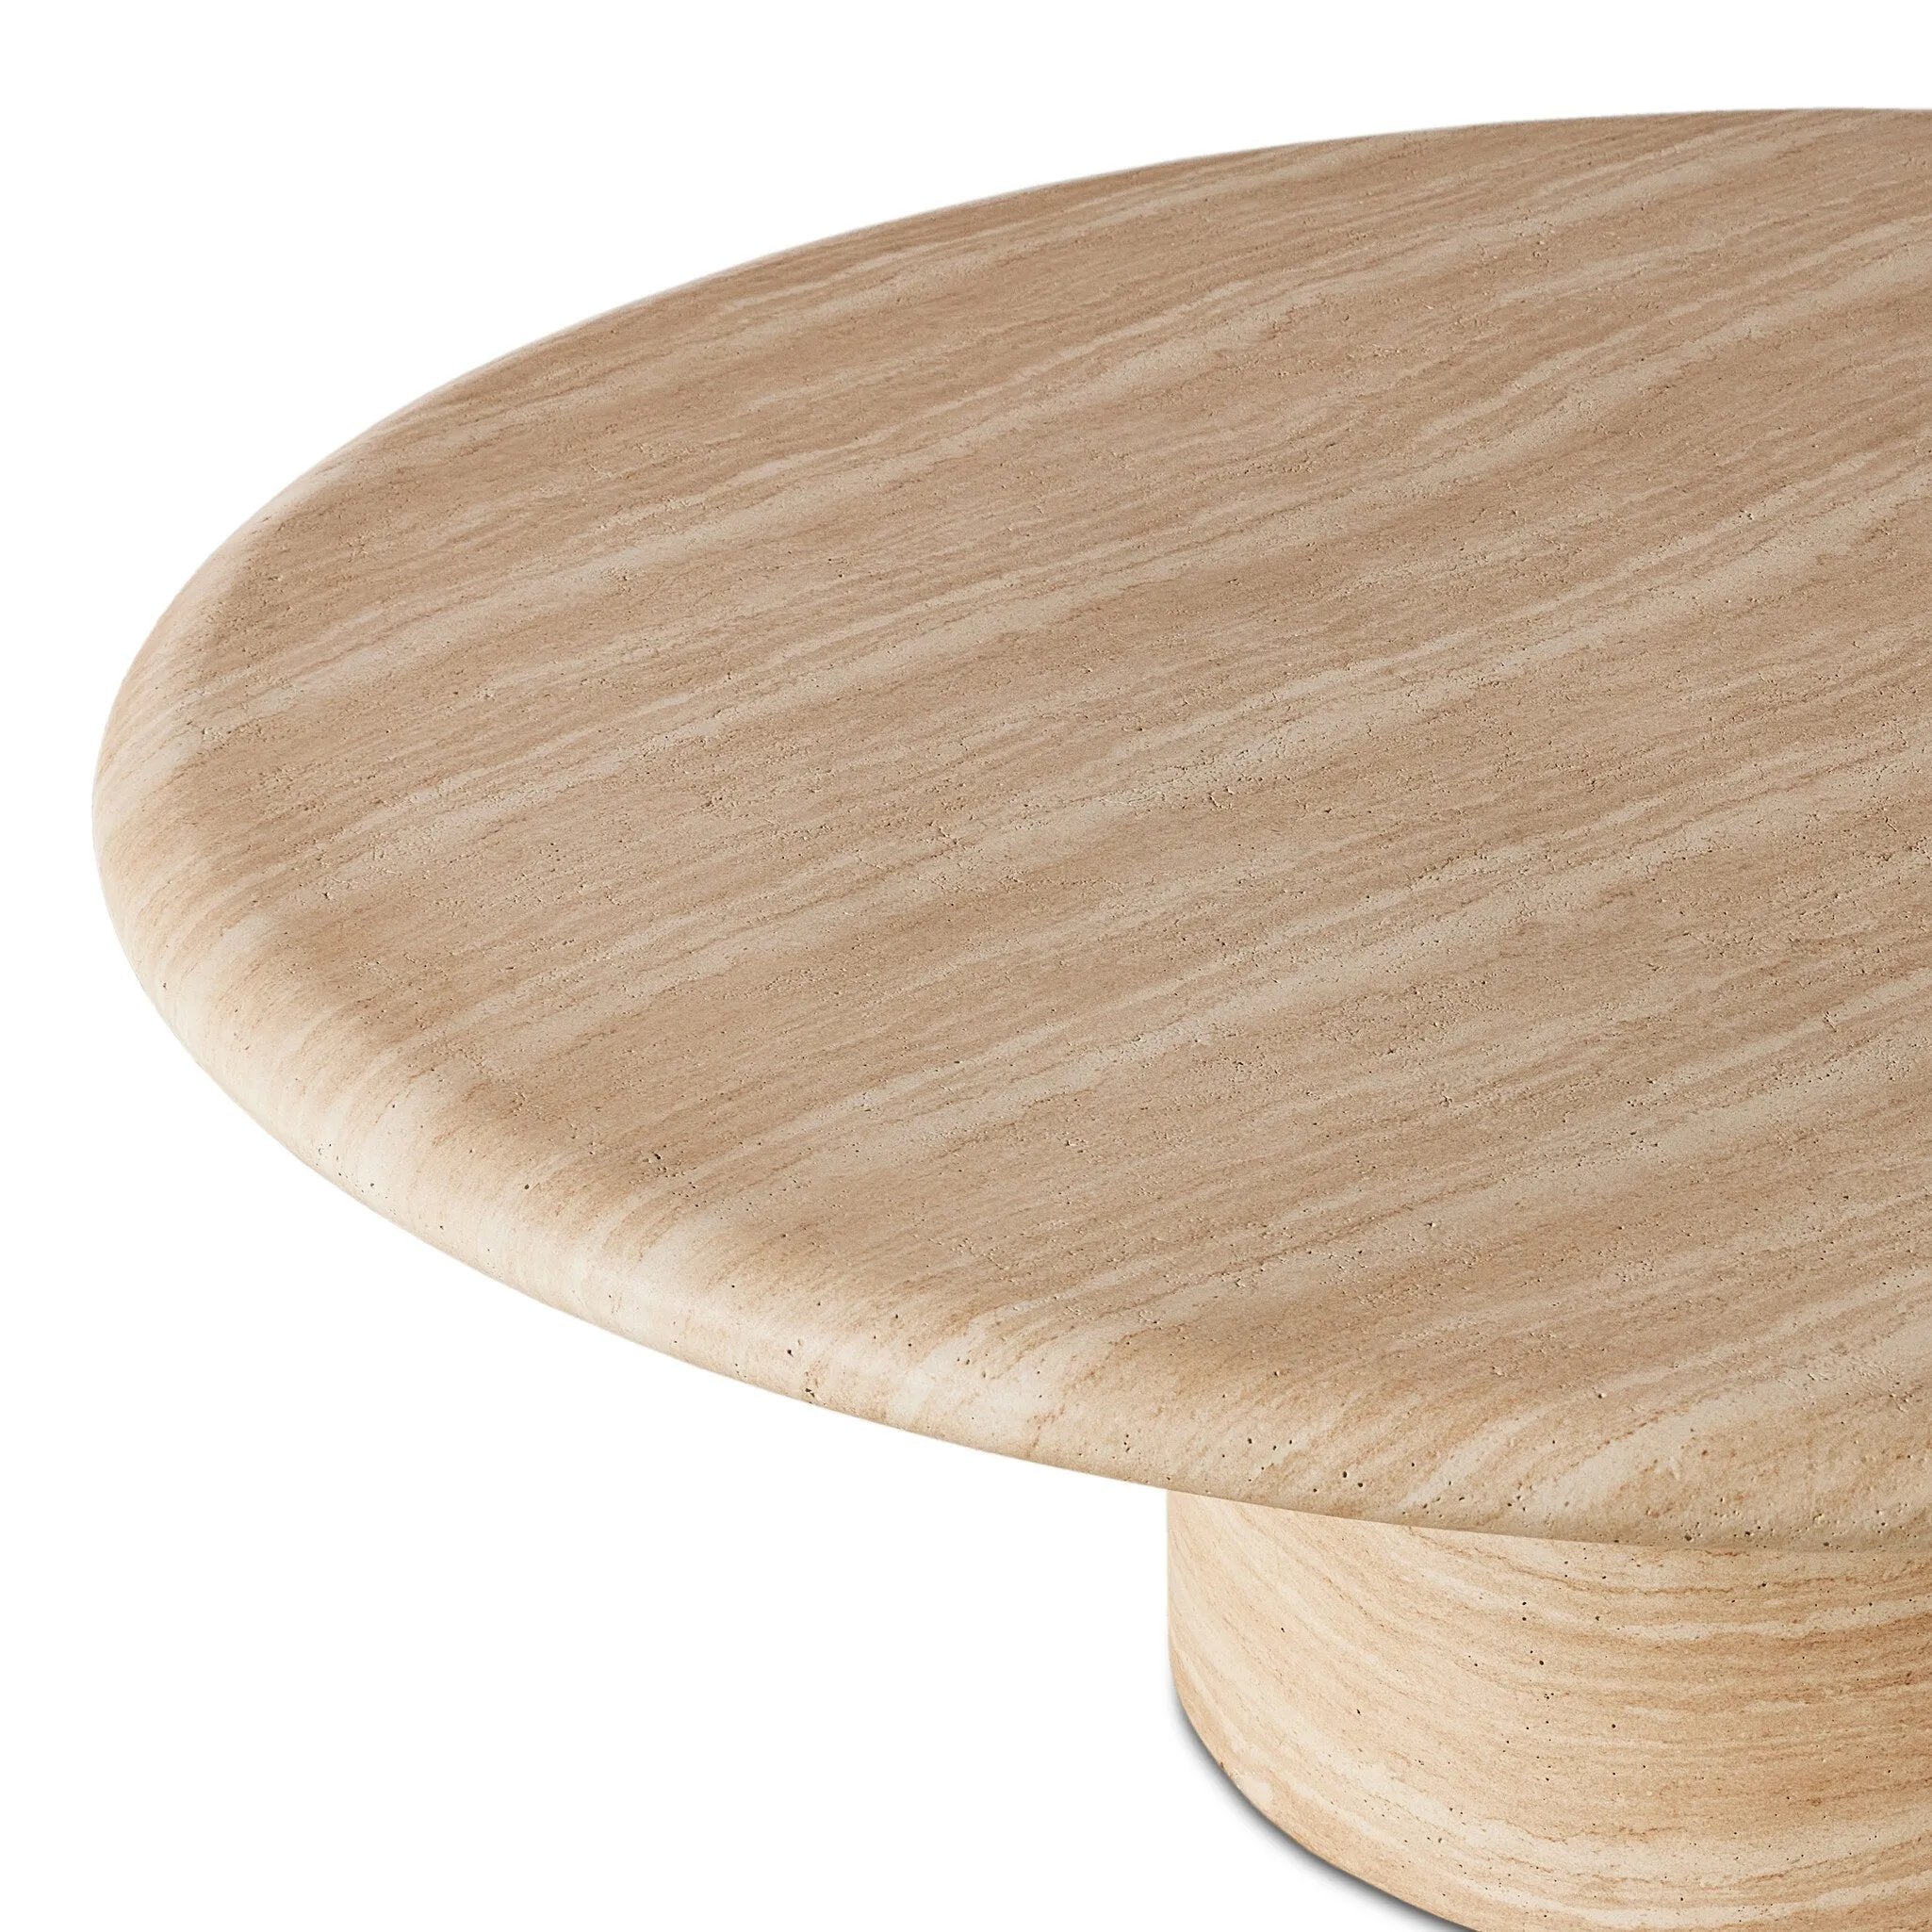 A beautiful dome-shaped pedestal base supports a rounded tabletop with bullnose edges. Made from cast concrete with a water-transfer finish which resemble natural stone.Collection: Chandle Amethyst Home provides interior design, new home construction design consulting, vintage area rugs, and lighting in the Charlotte metro area.